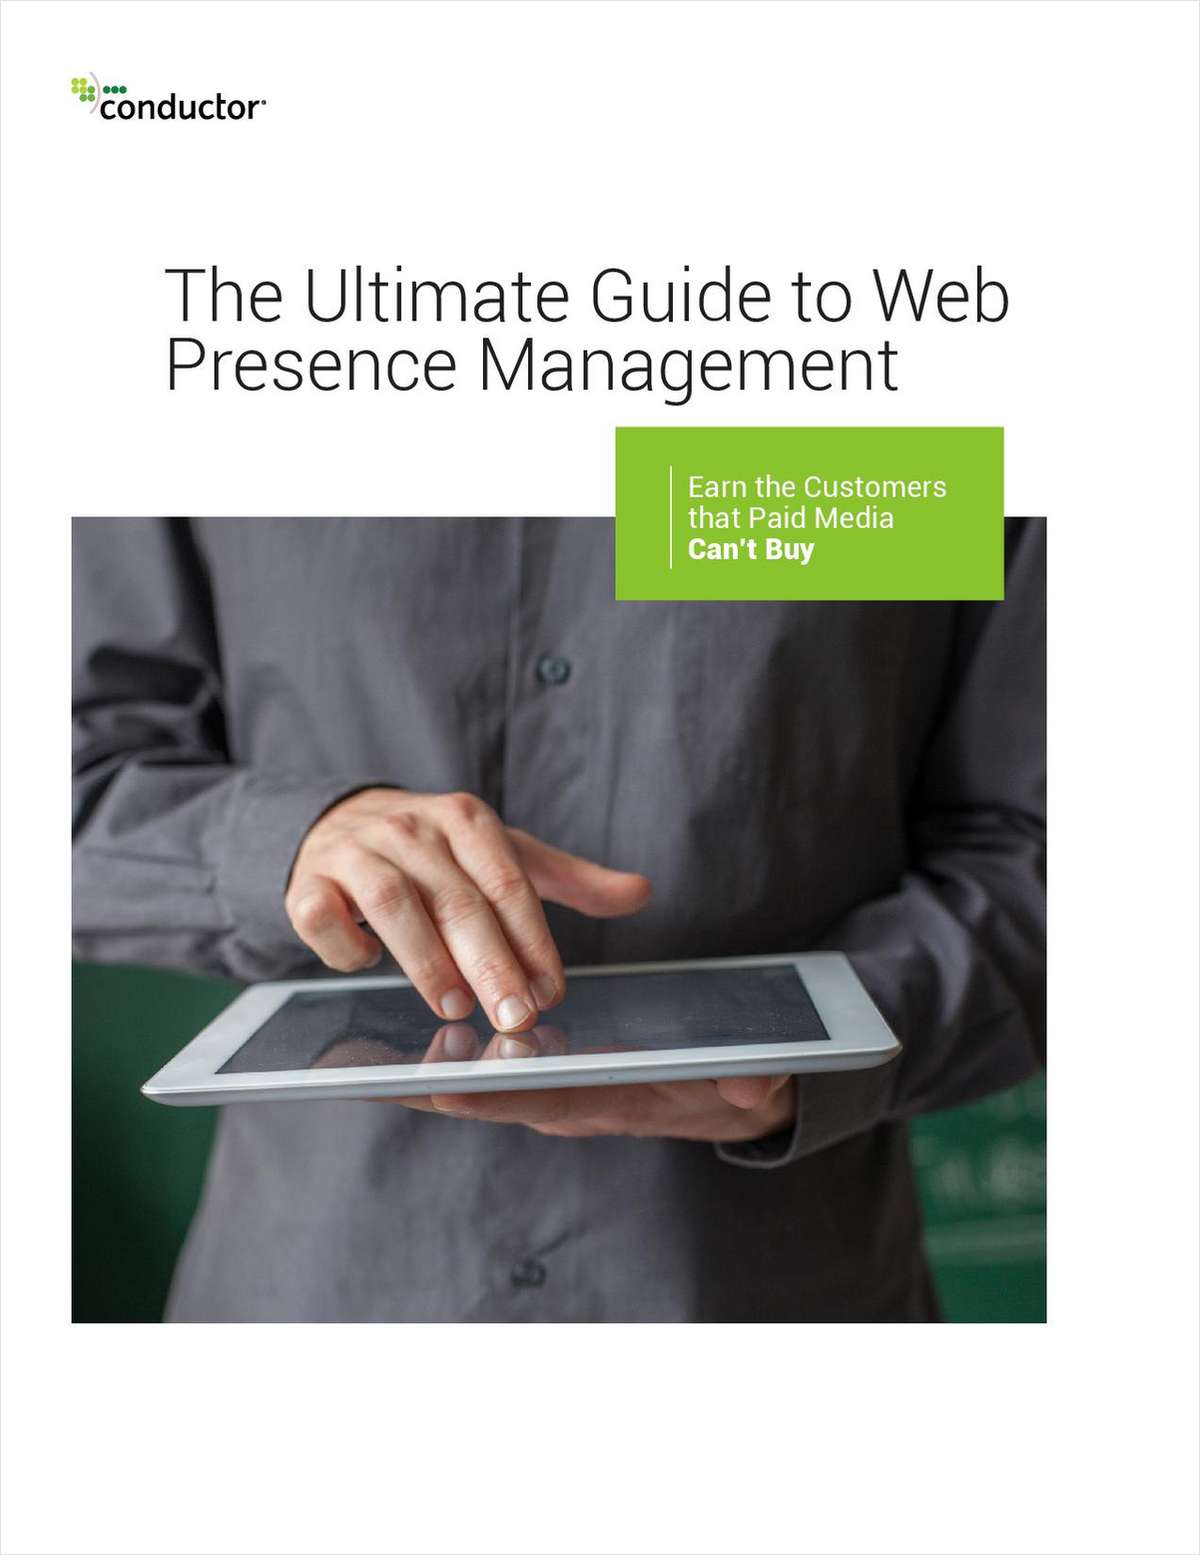 Web Presence Management: The Ultimate Guide